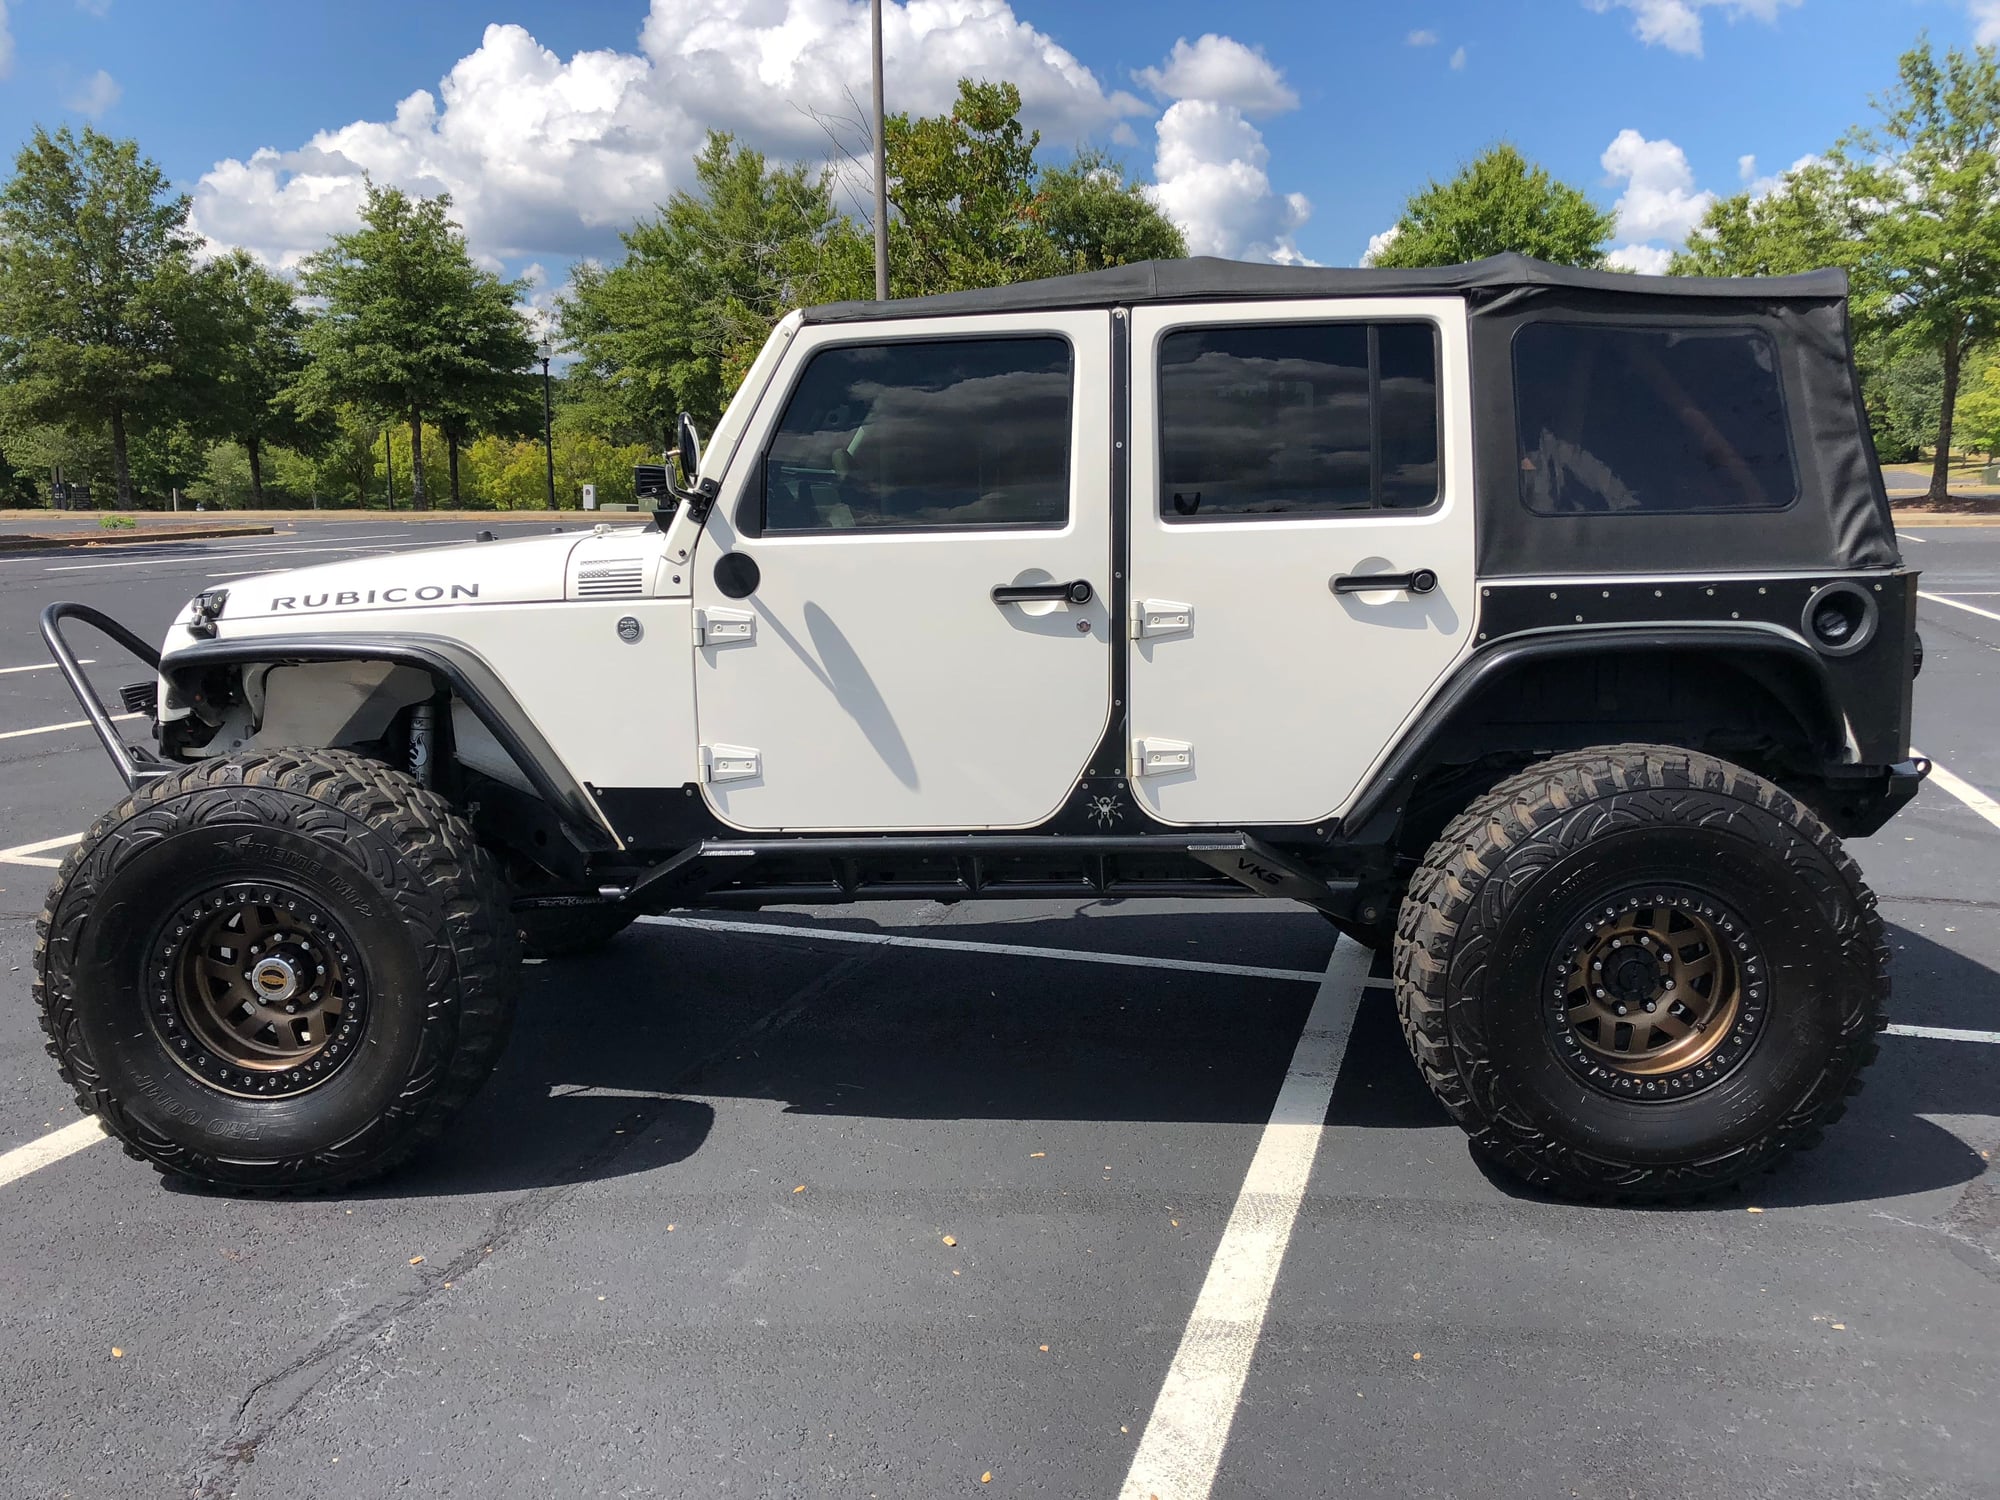 2008 Jeep Wrangler - 2008 Jeep Wrangler Rubicon Unlimited, Supercharged, Cages, Tons/40's - Used - VIN 1J4GA69198L527713 - 120,999 Miles - 6 cyl - 4WD - Automatic - SUV - White - Woodstock, GA 30188, United States